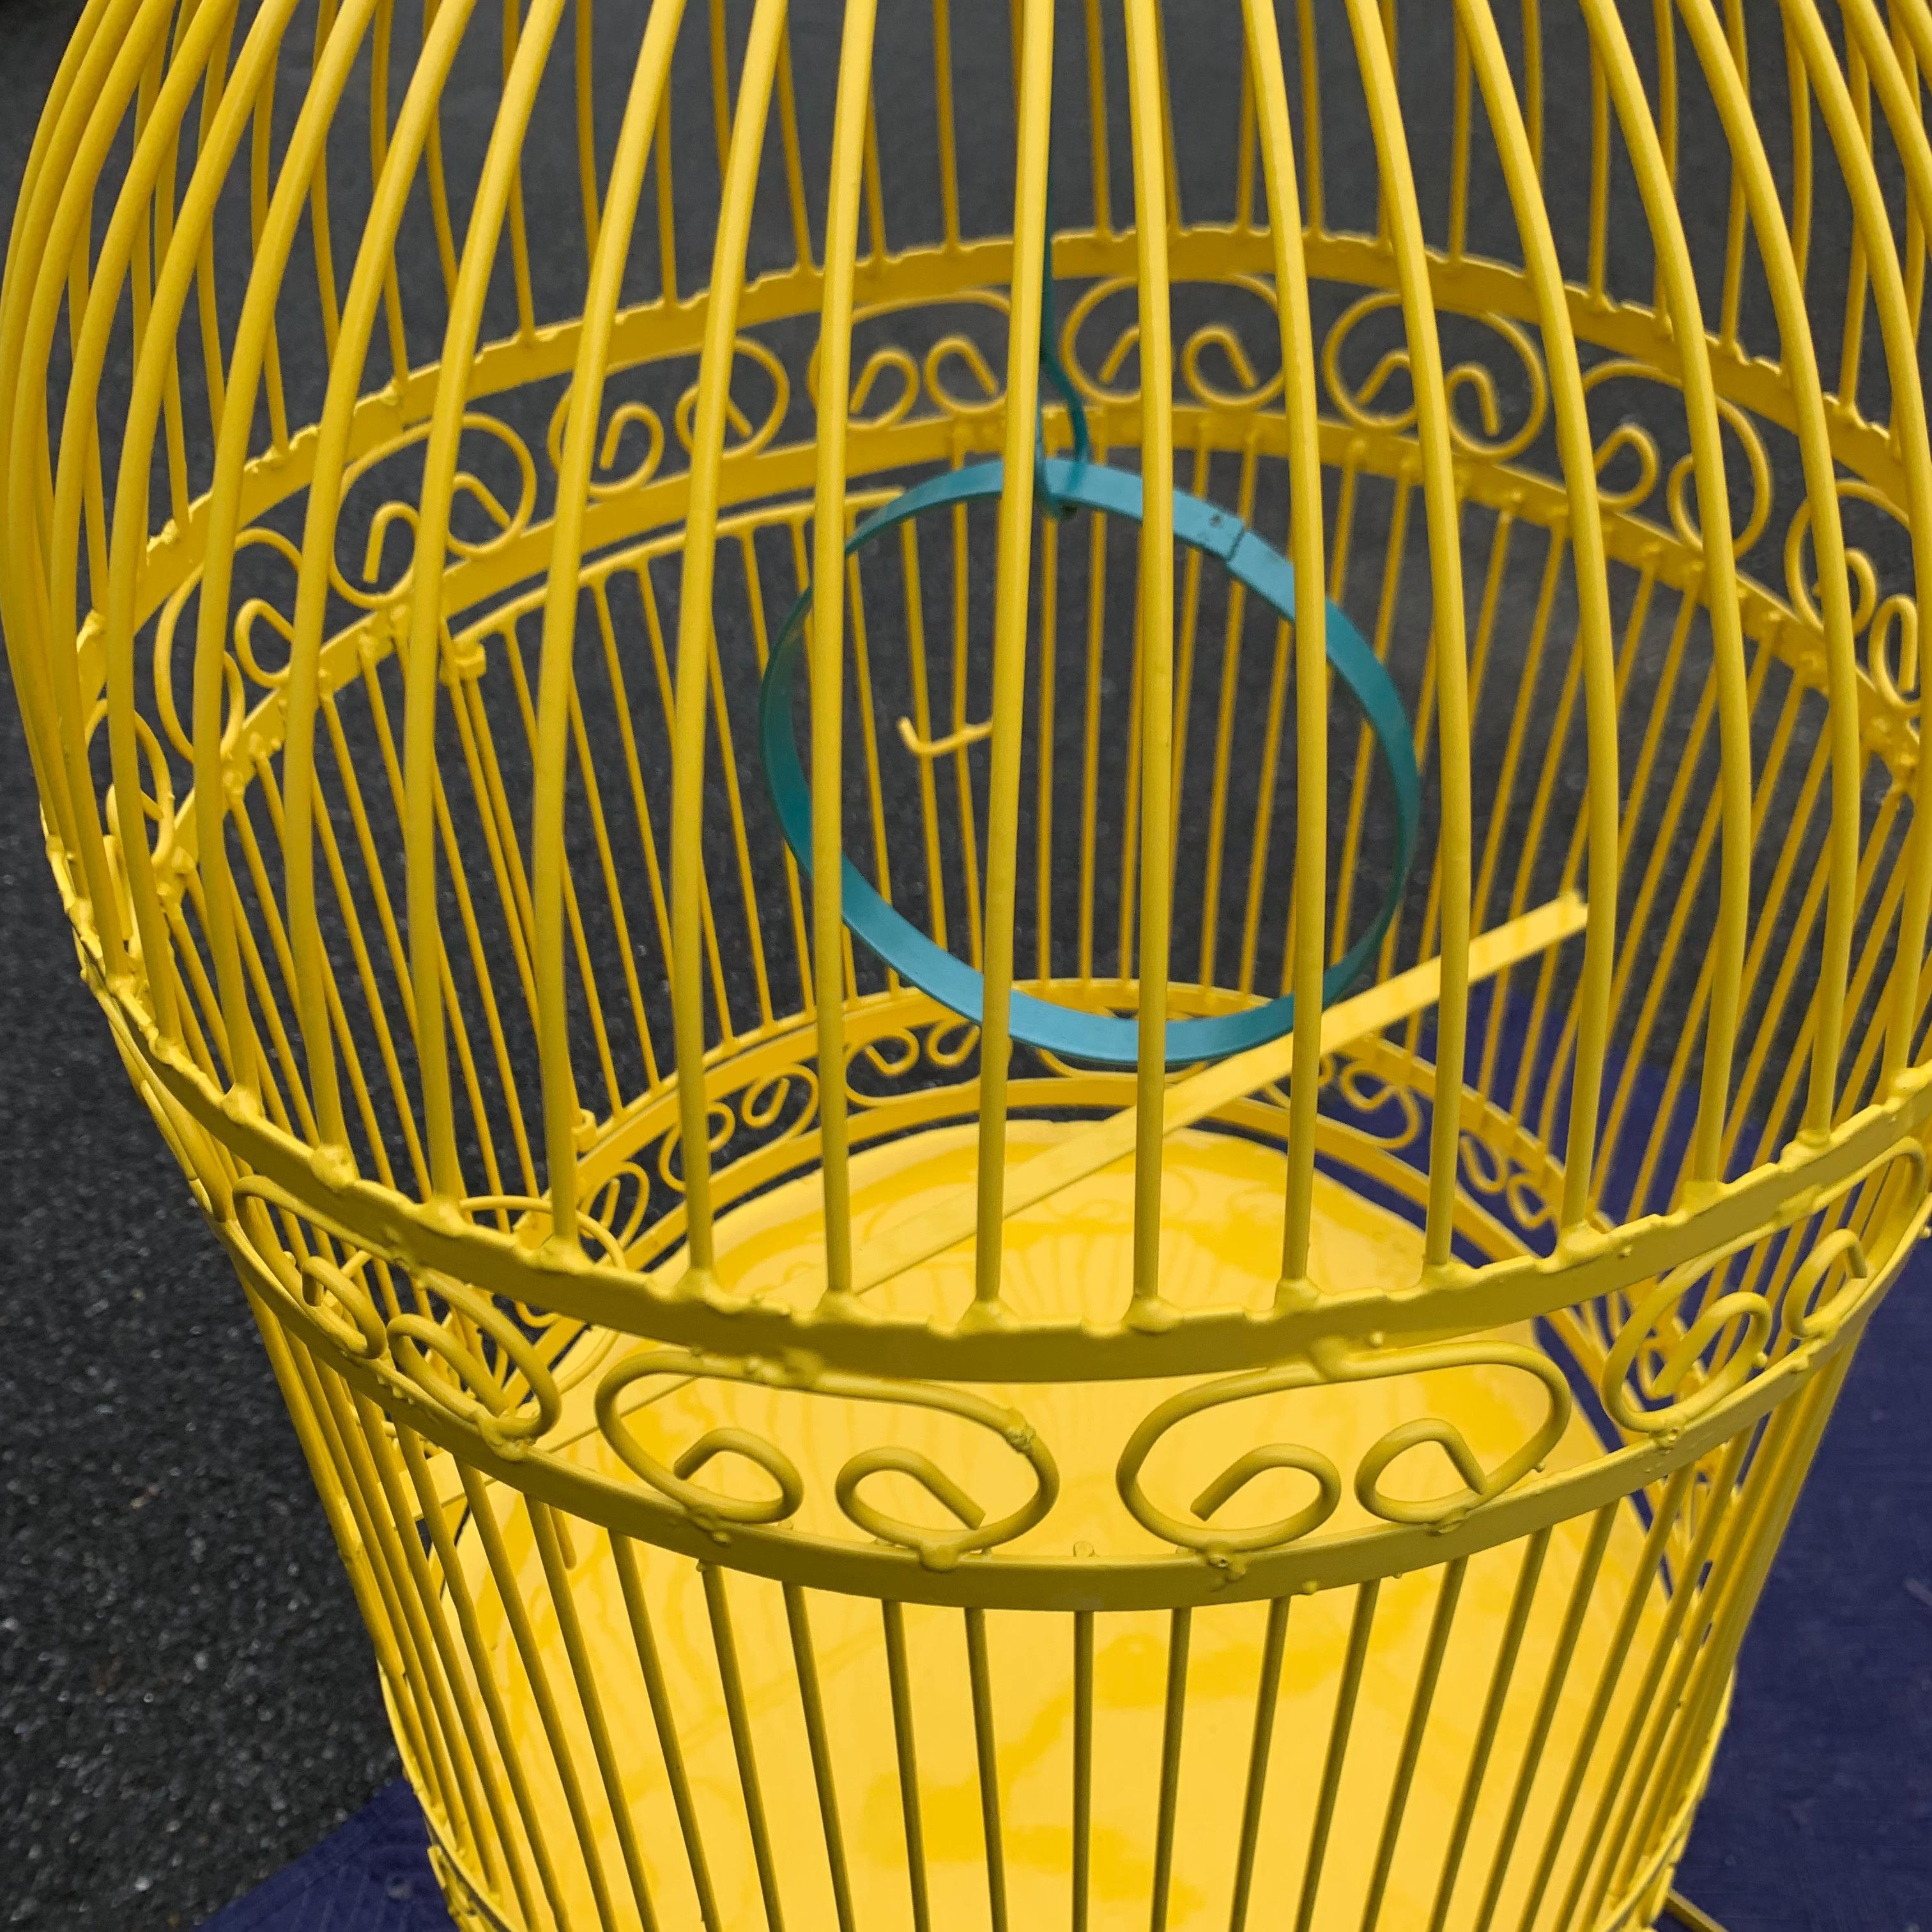 Vintage Metal Birdcage On Stand, Newly Powder-Coated In Bright Sunshine Yellow 3